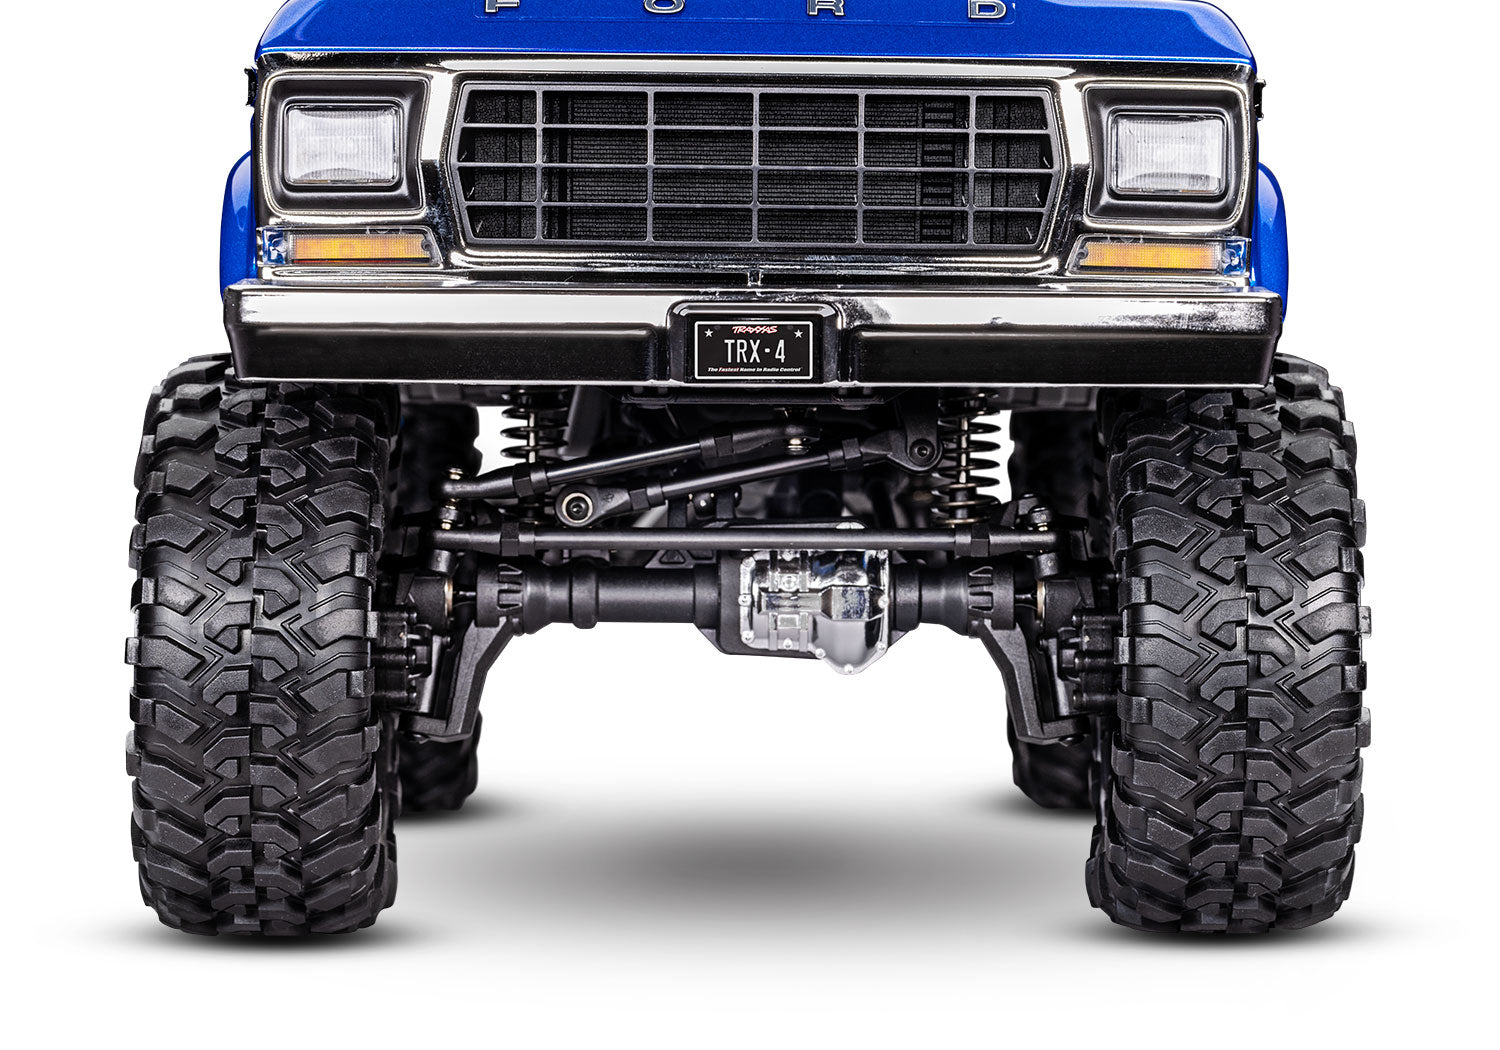 92046-4-BLUE TRX-4 Ford F-150 High Trail Edition – Superstition